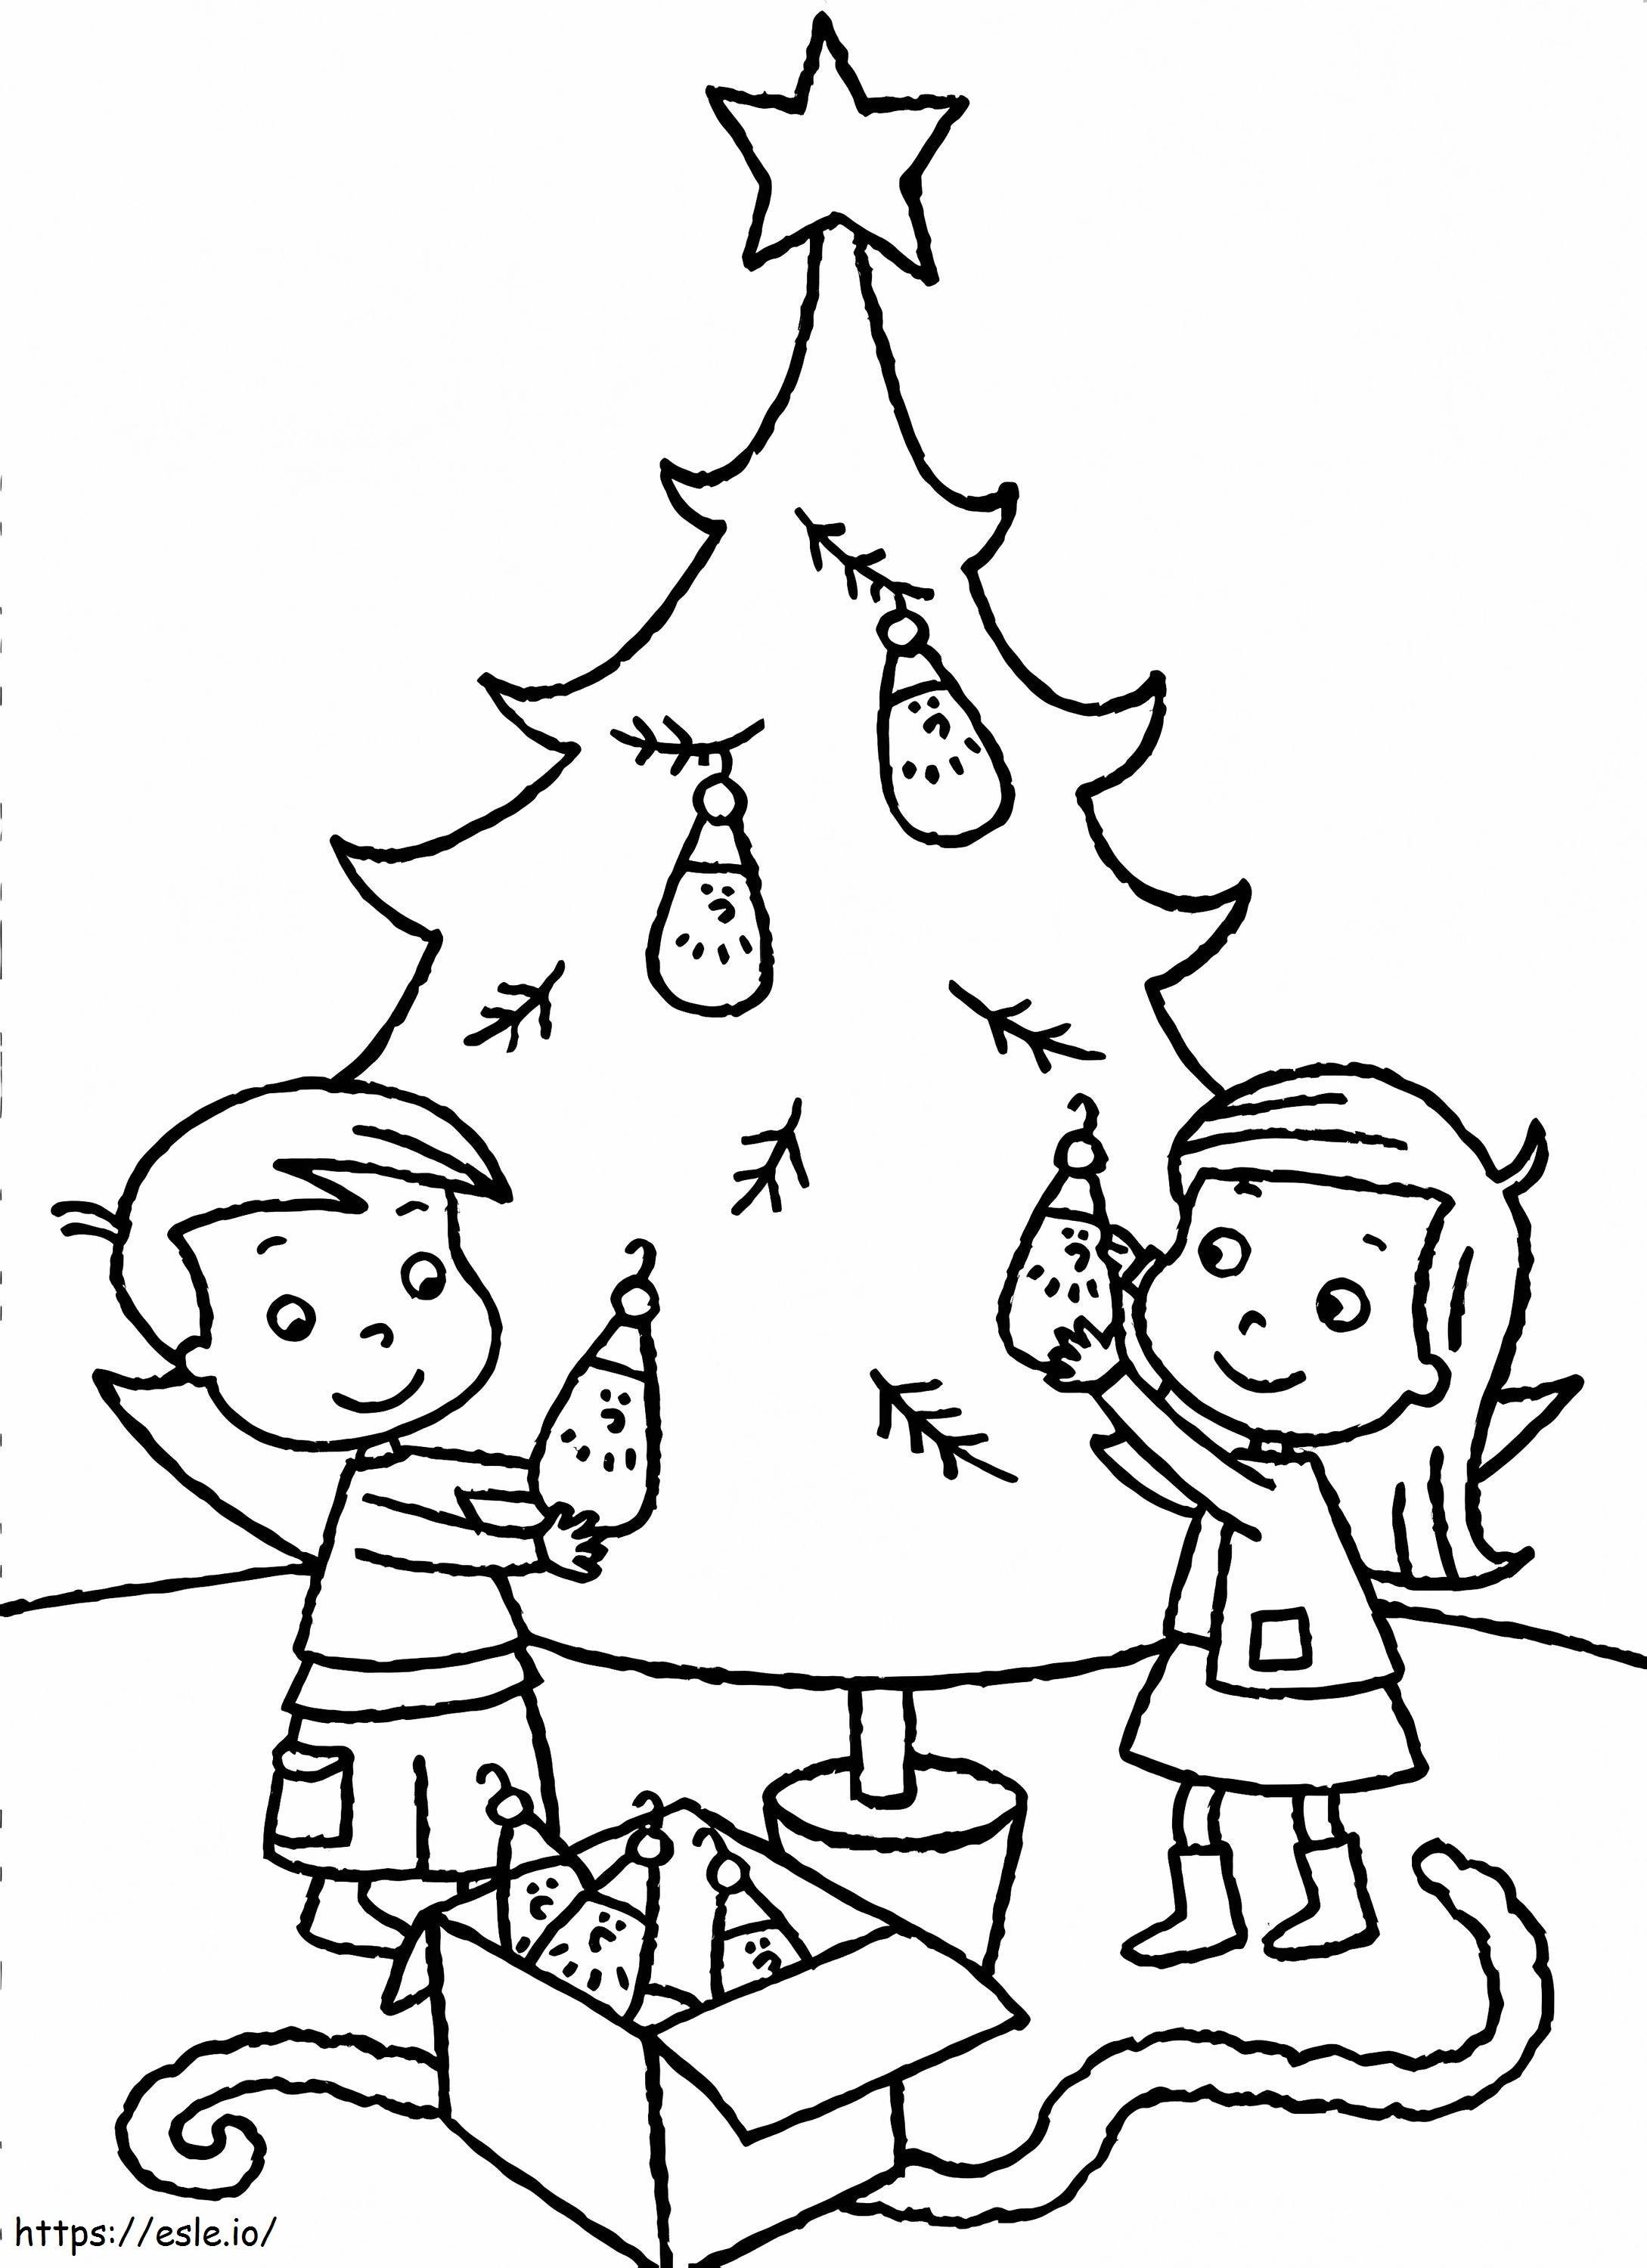 1534391925 Children Decorating coloring page